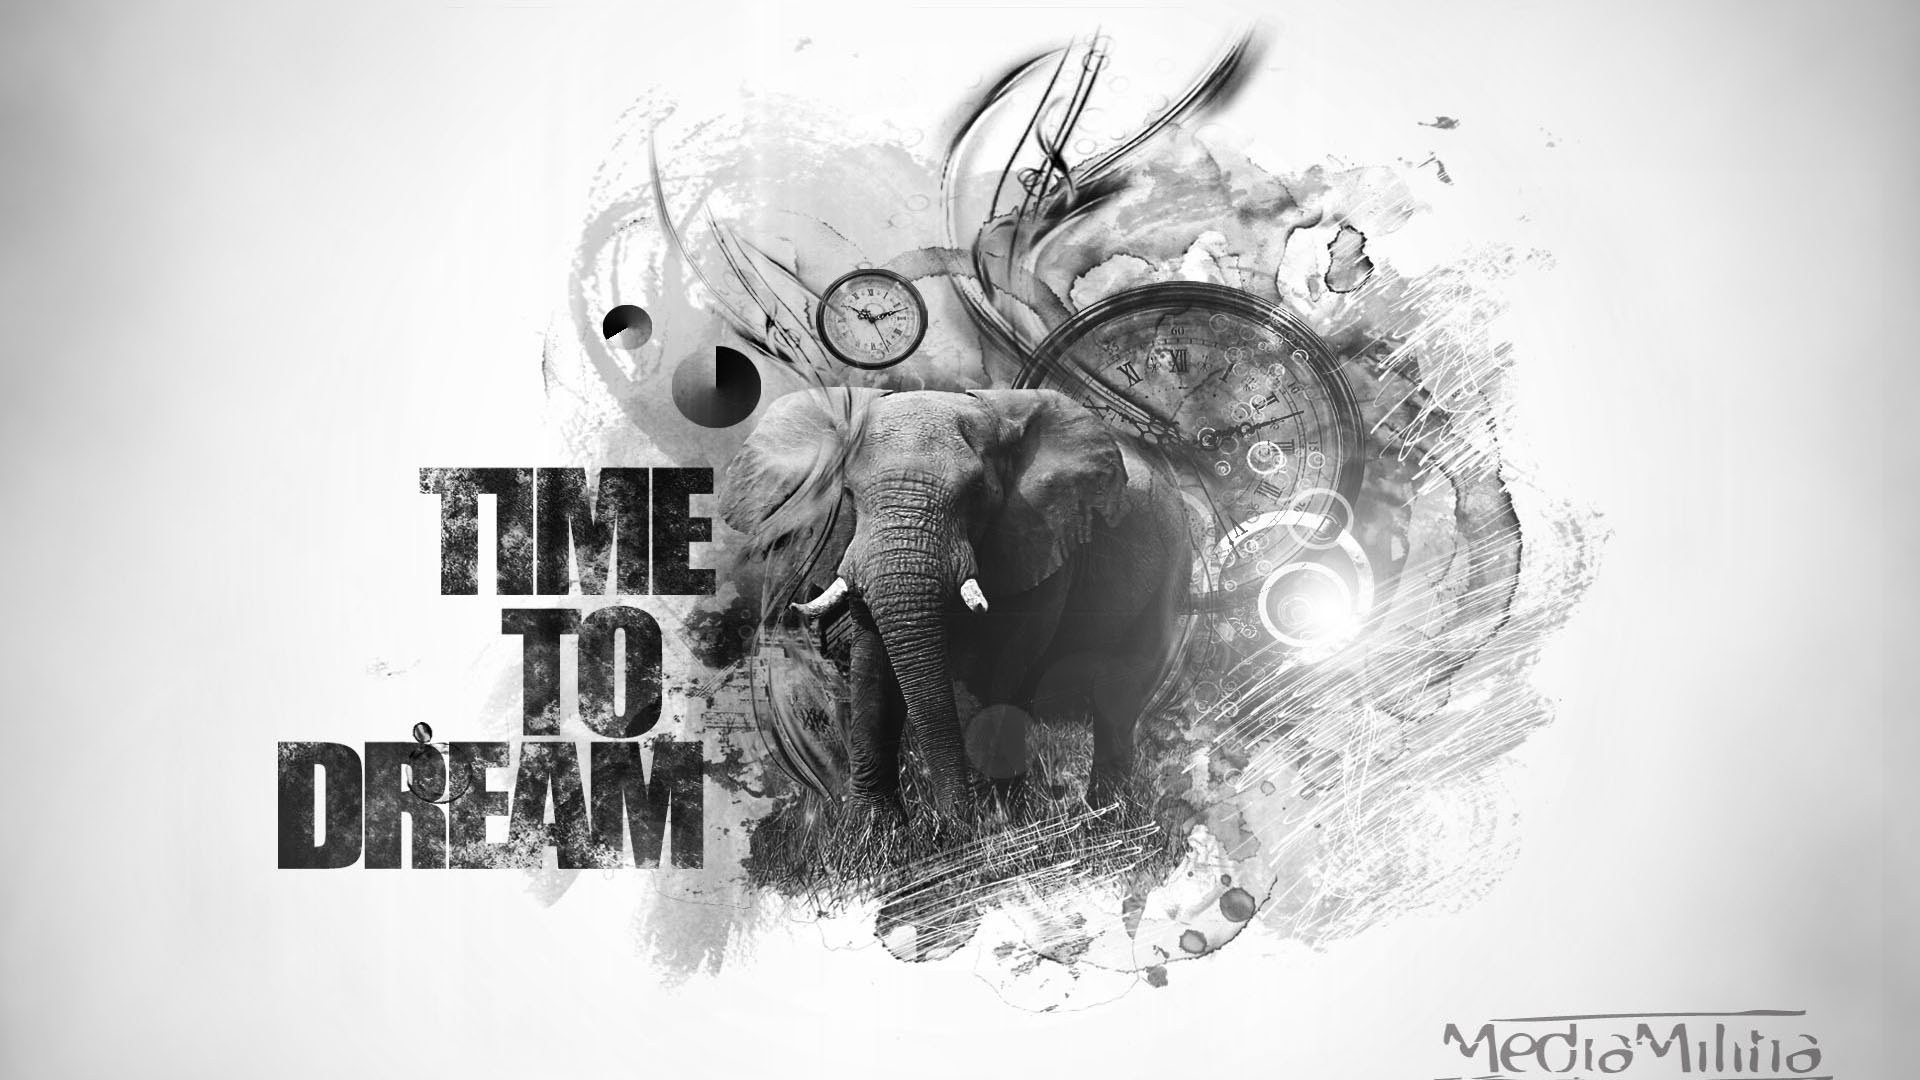 best creative wallpapers,illustration,graphic design,black and white,cartoon,monochrome